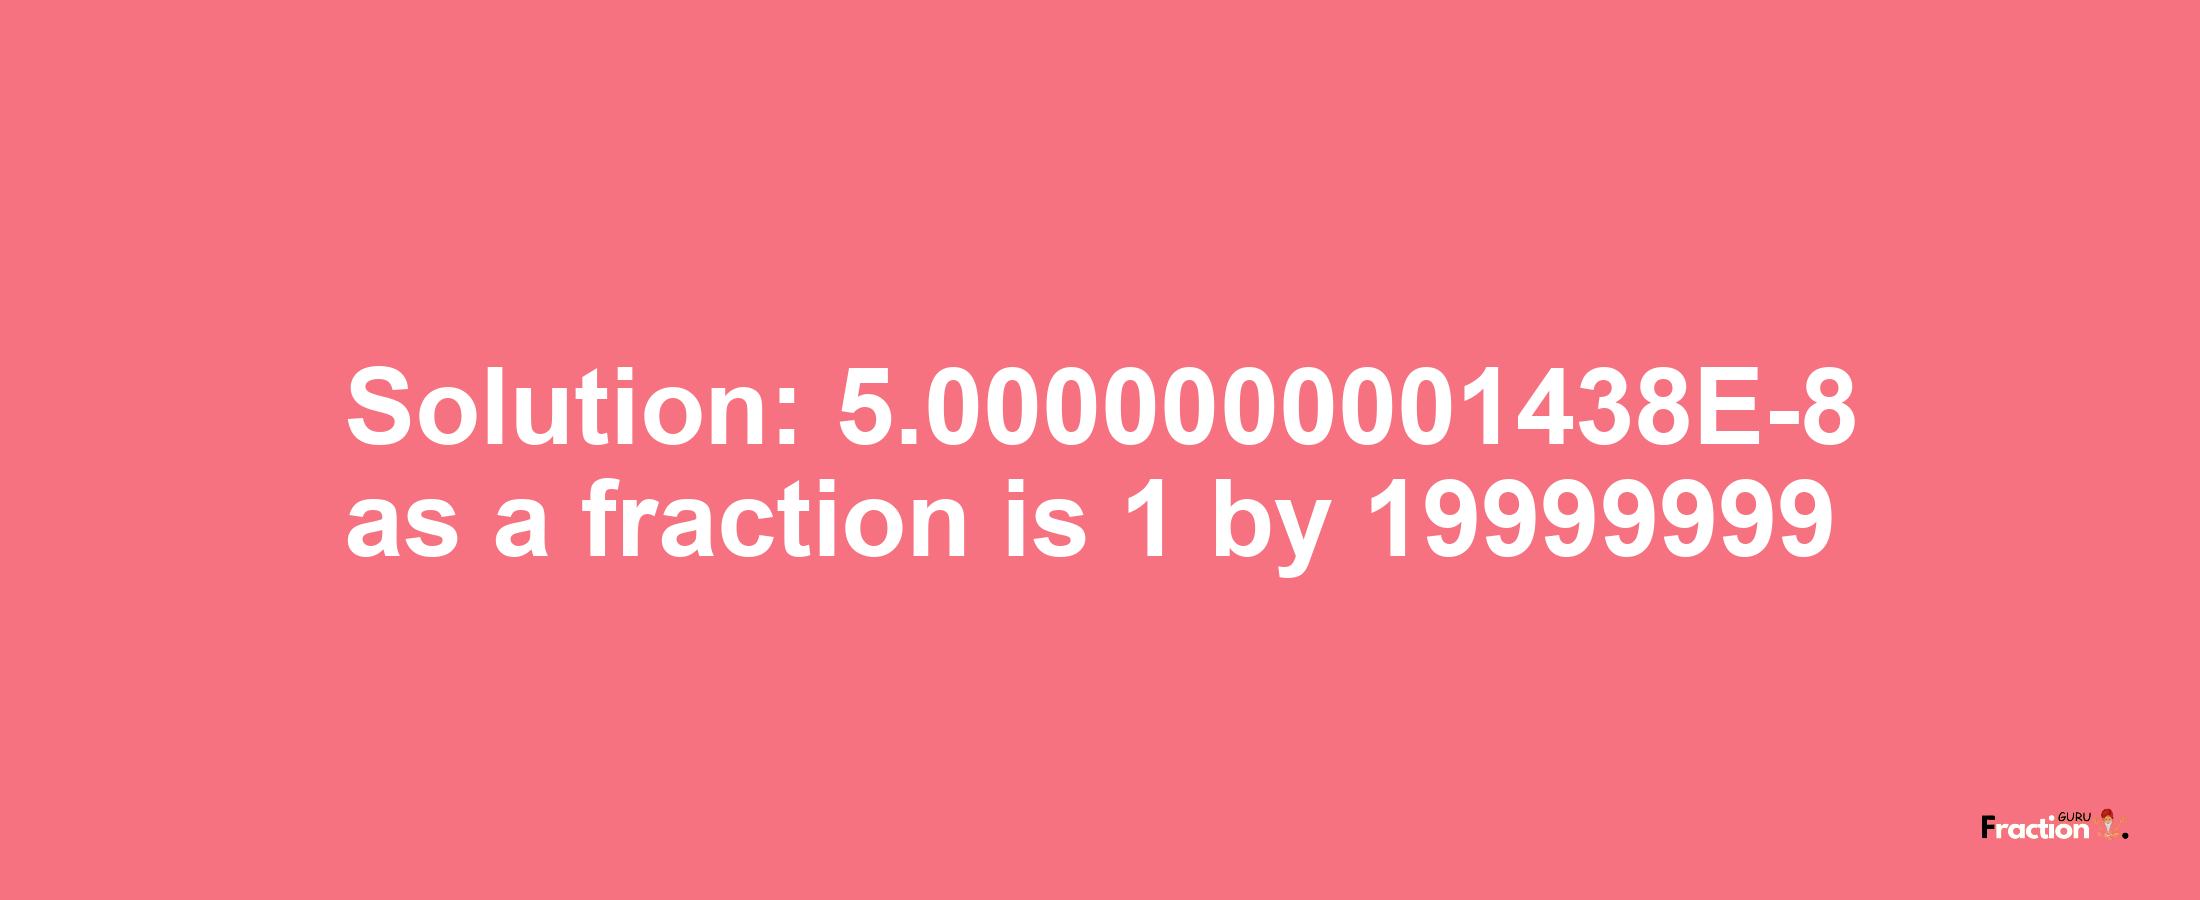 Solution:5.0000000001438E-8 as a fraction is 1/19999999